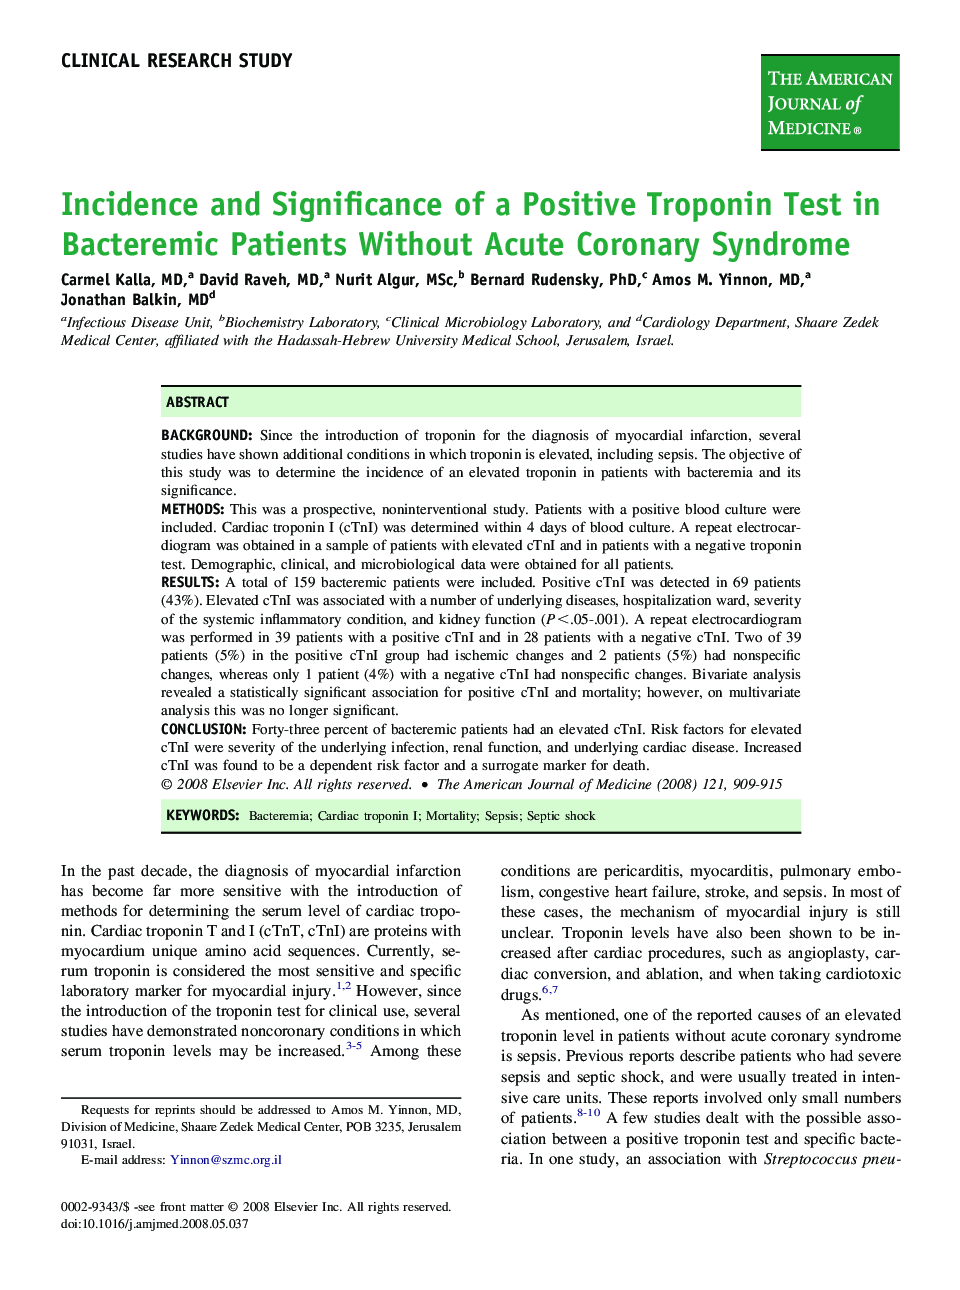 Incidence and Significance of a Positive Troponin Test in Bacteremic Patients Without Acute Coronary Syndrome